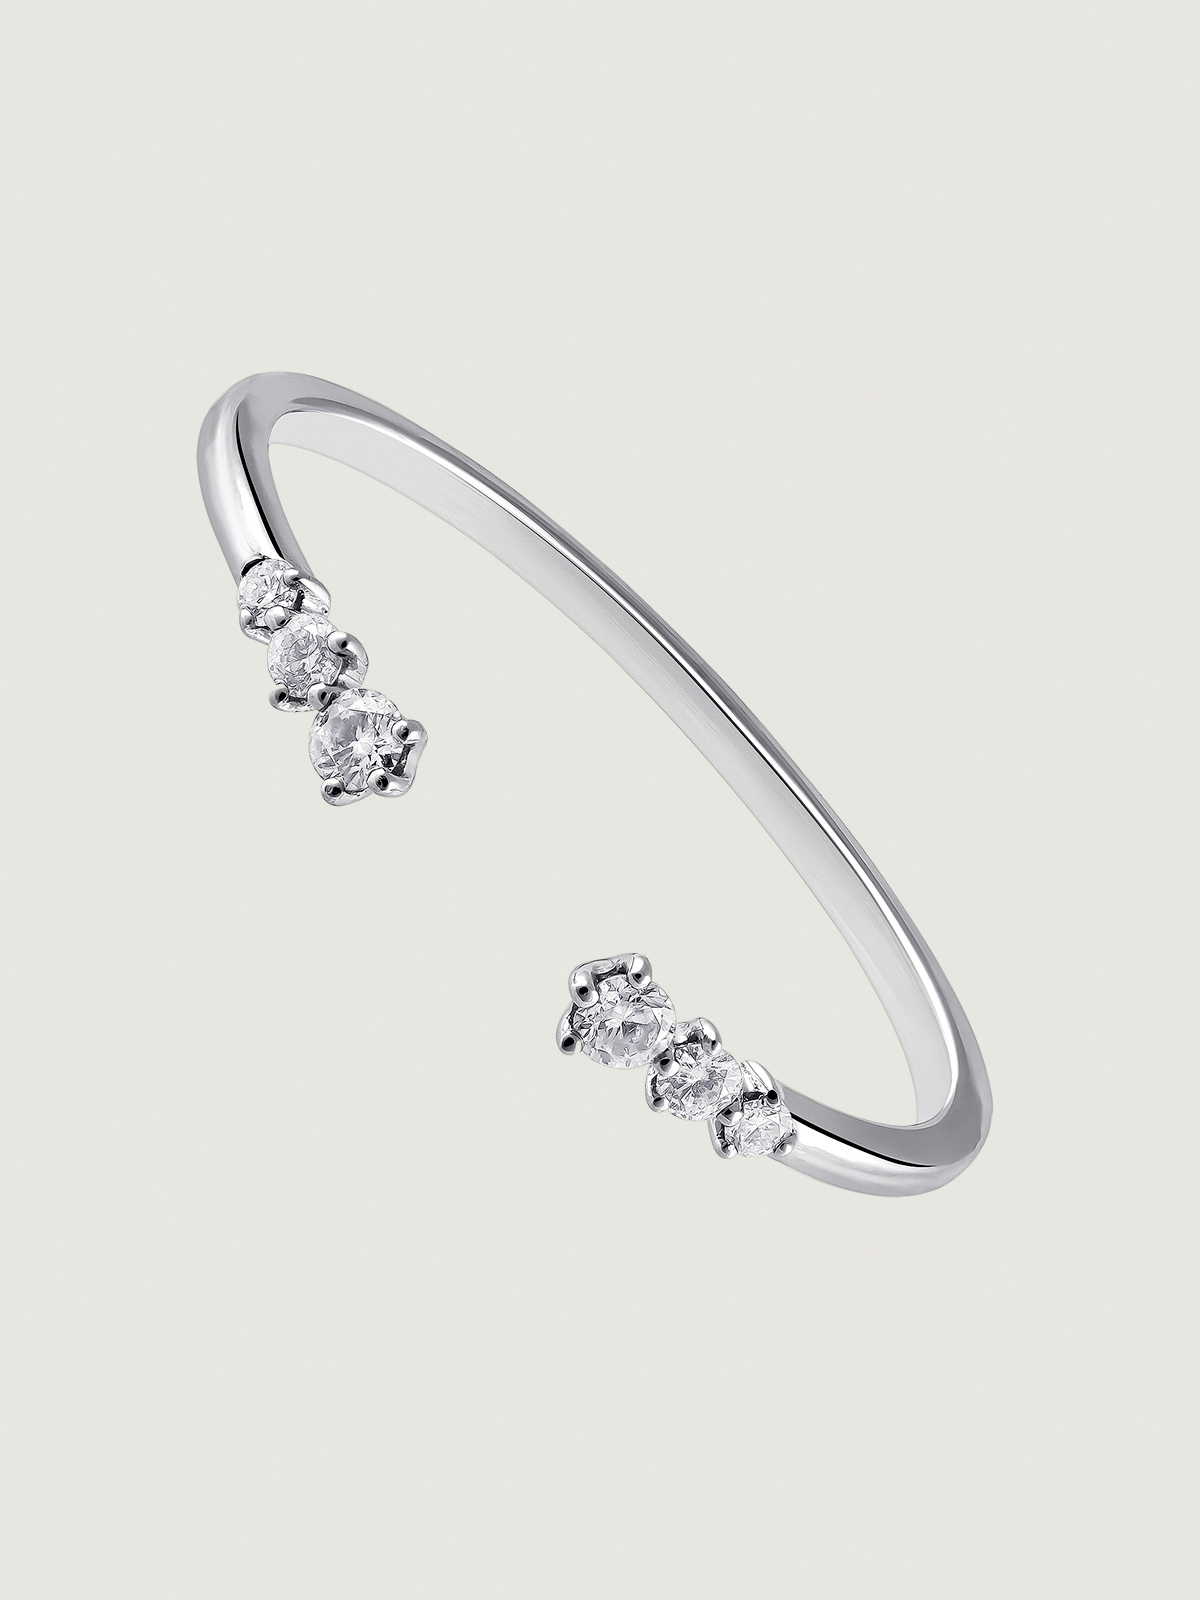 You and Me ring made of 18K white gold with 0.1 cts diamonds.